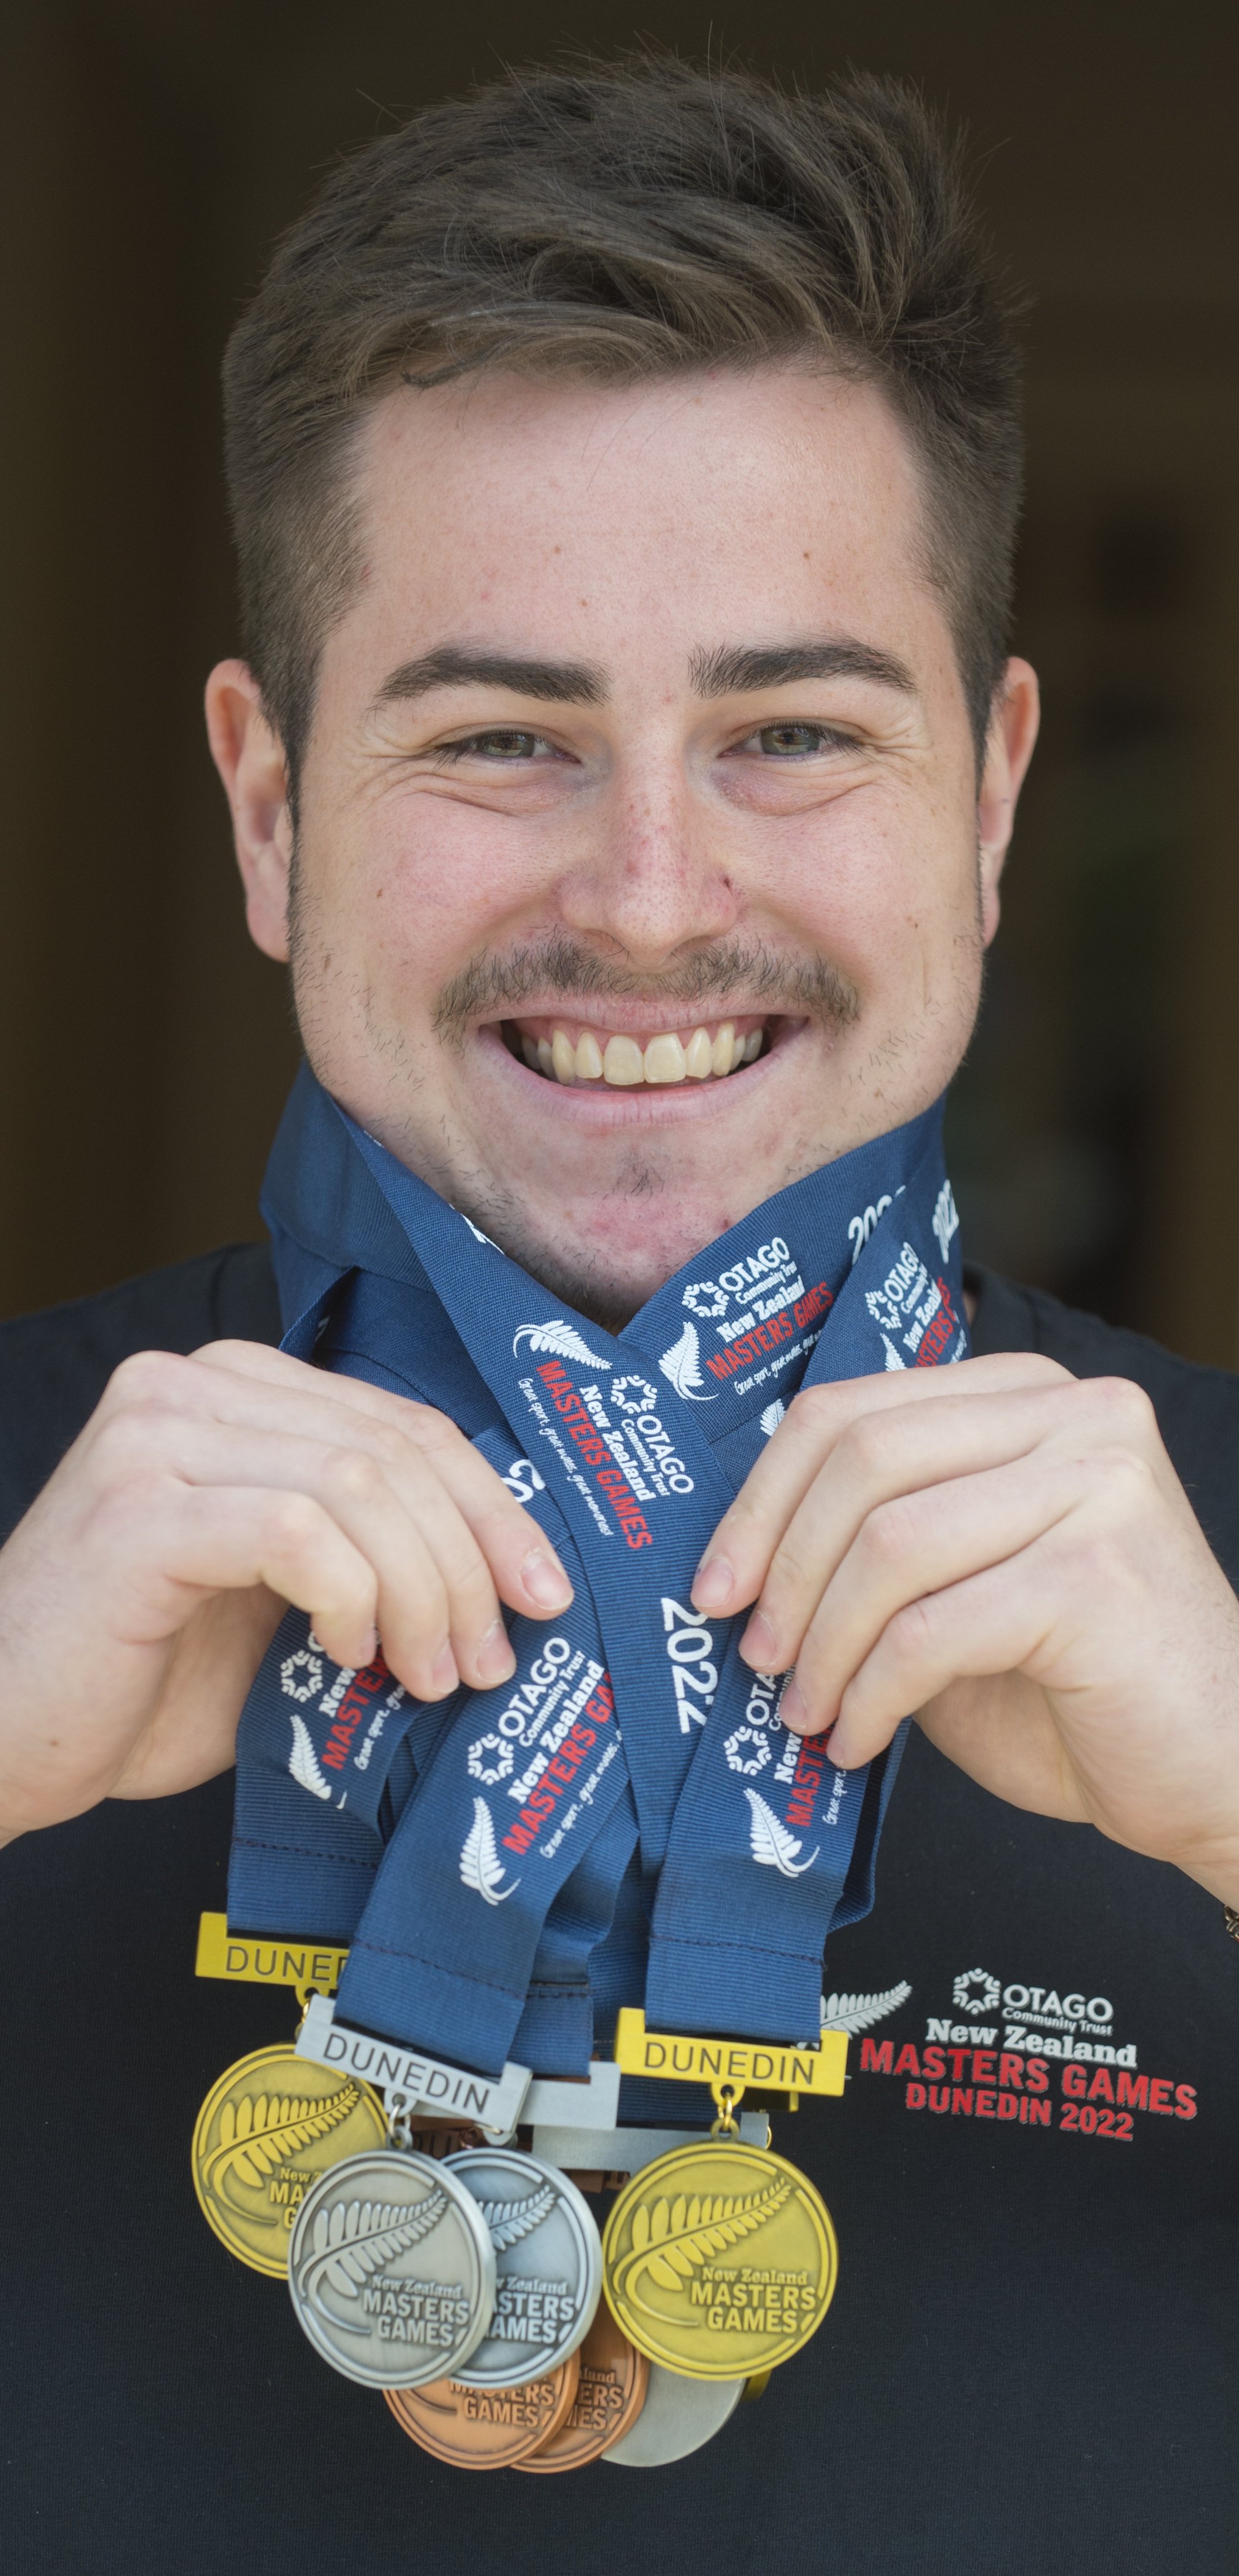 New Zealand Masters Games marketing events assistant Ben Anngow shows off medals produced for...